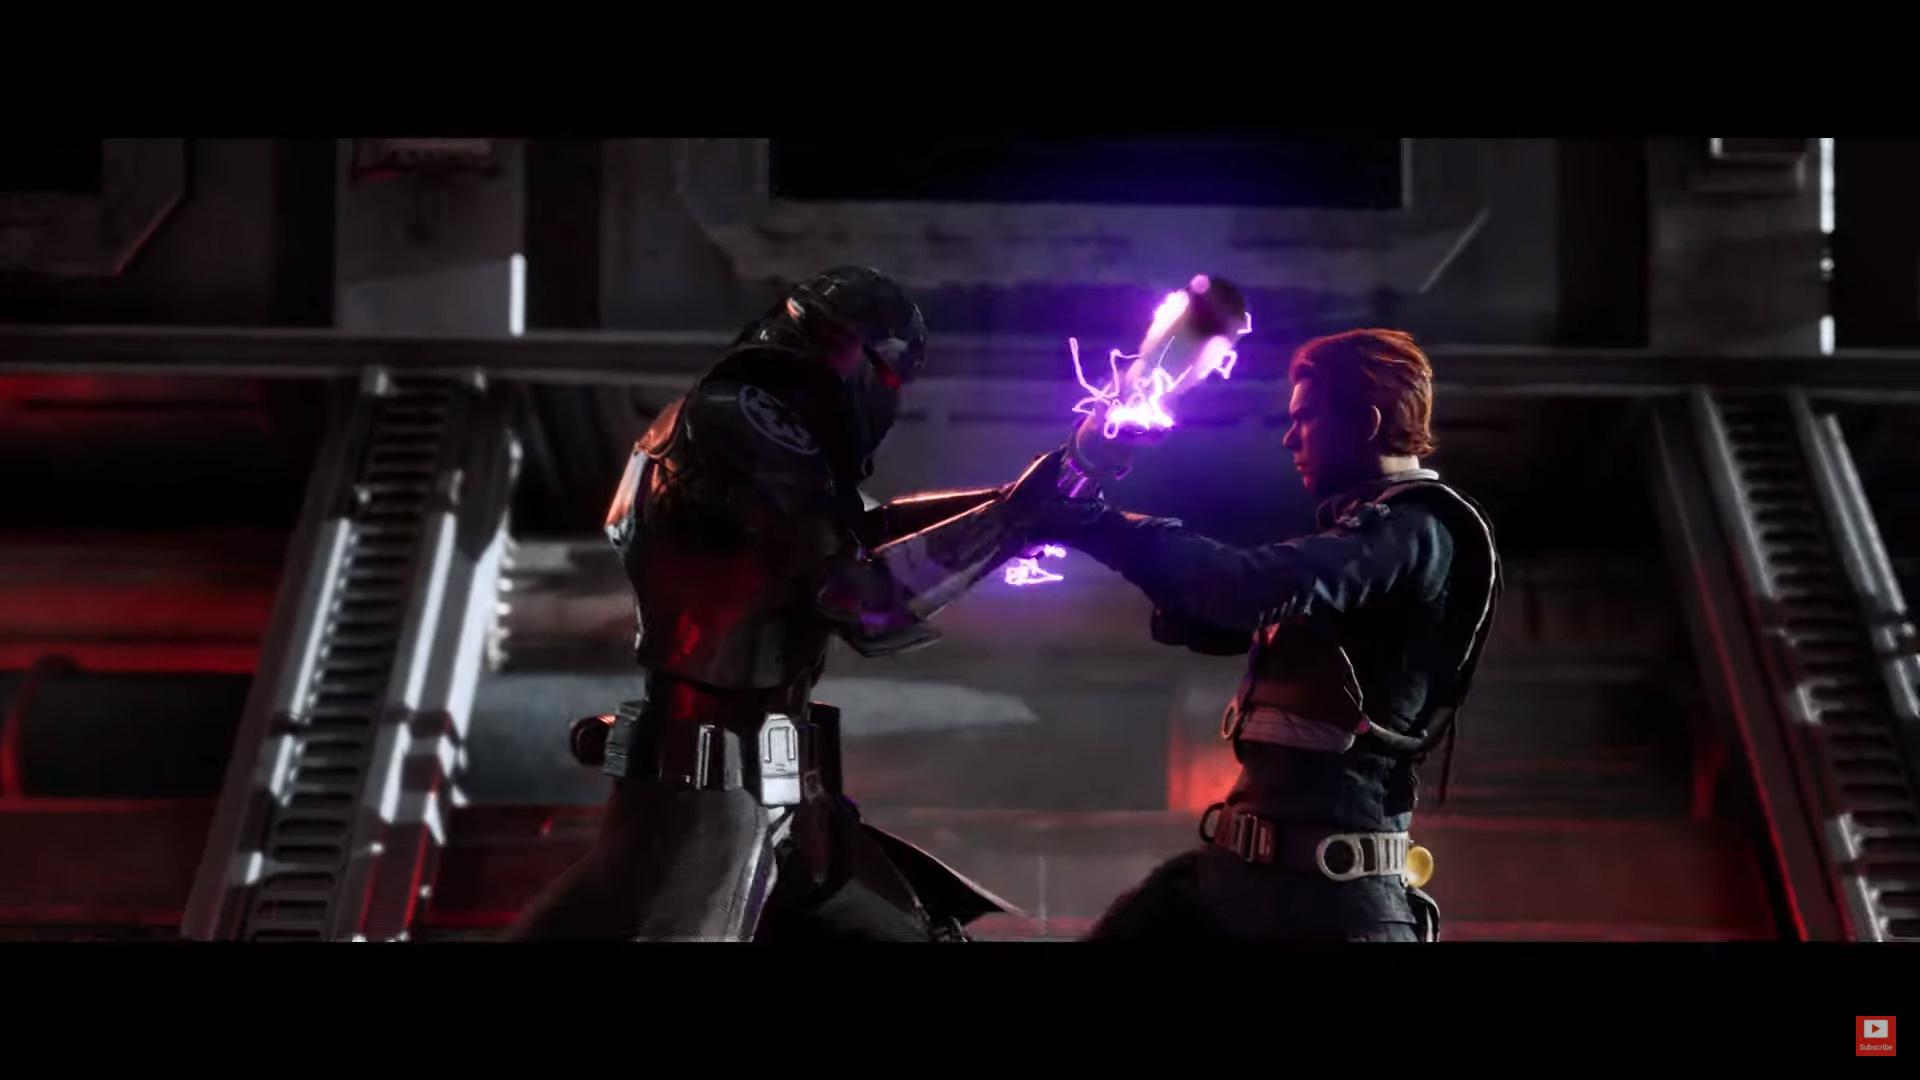 Star Wars Jedi: Fallen Order Collector's Edition leans towards the light  side